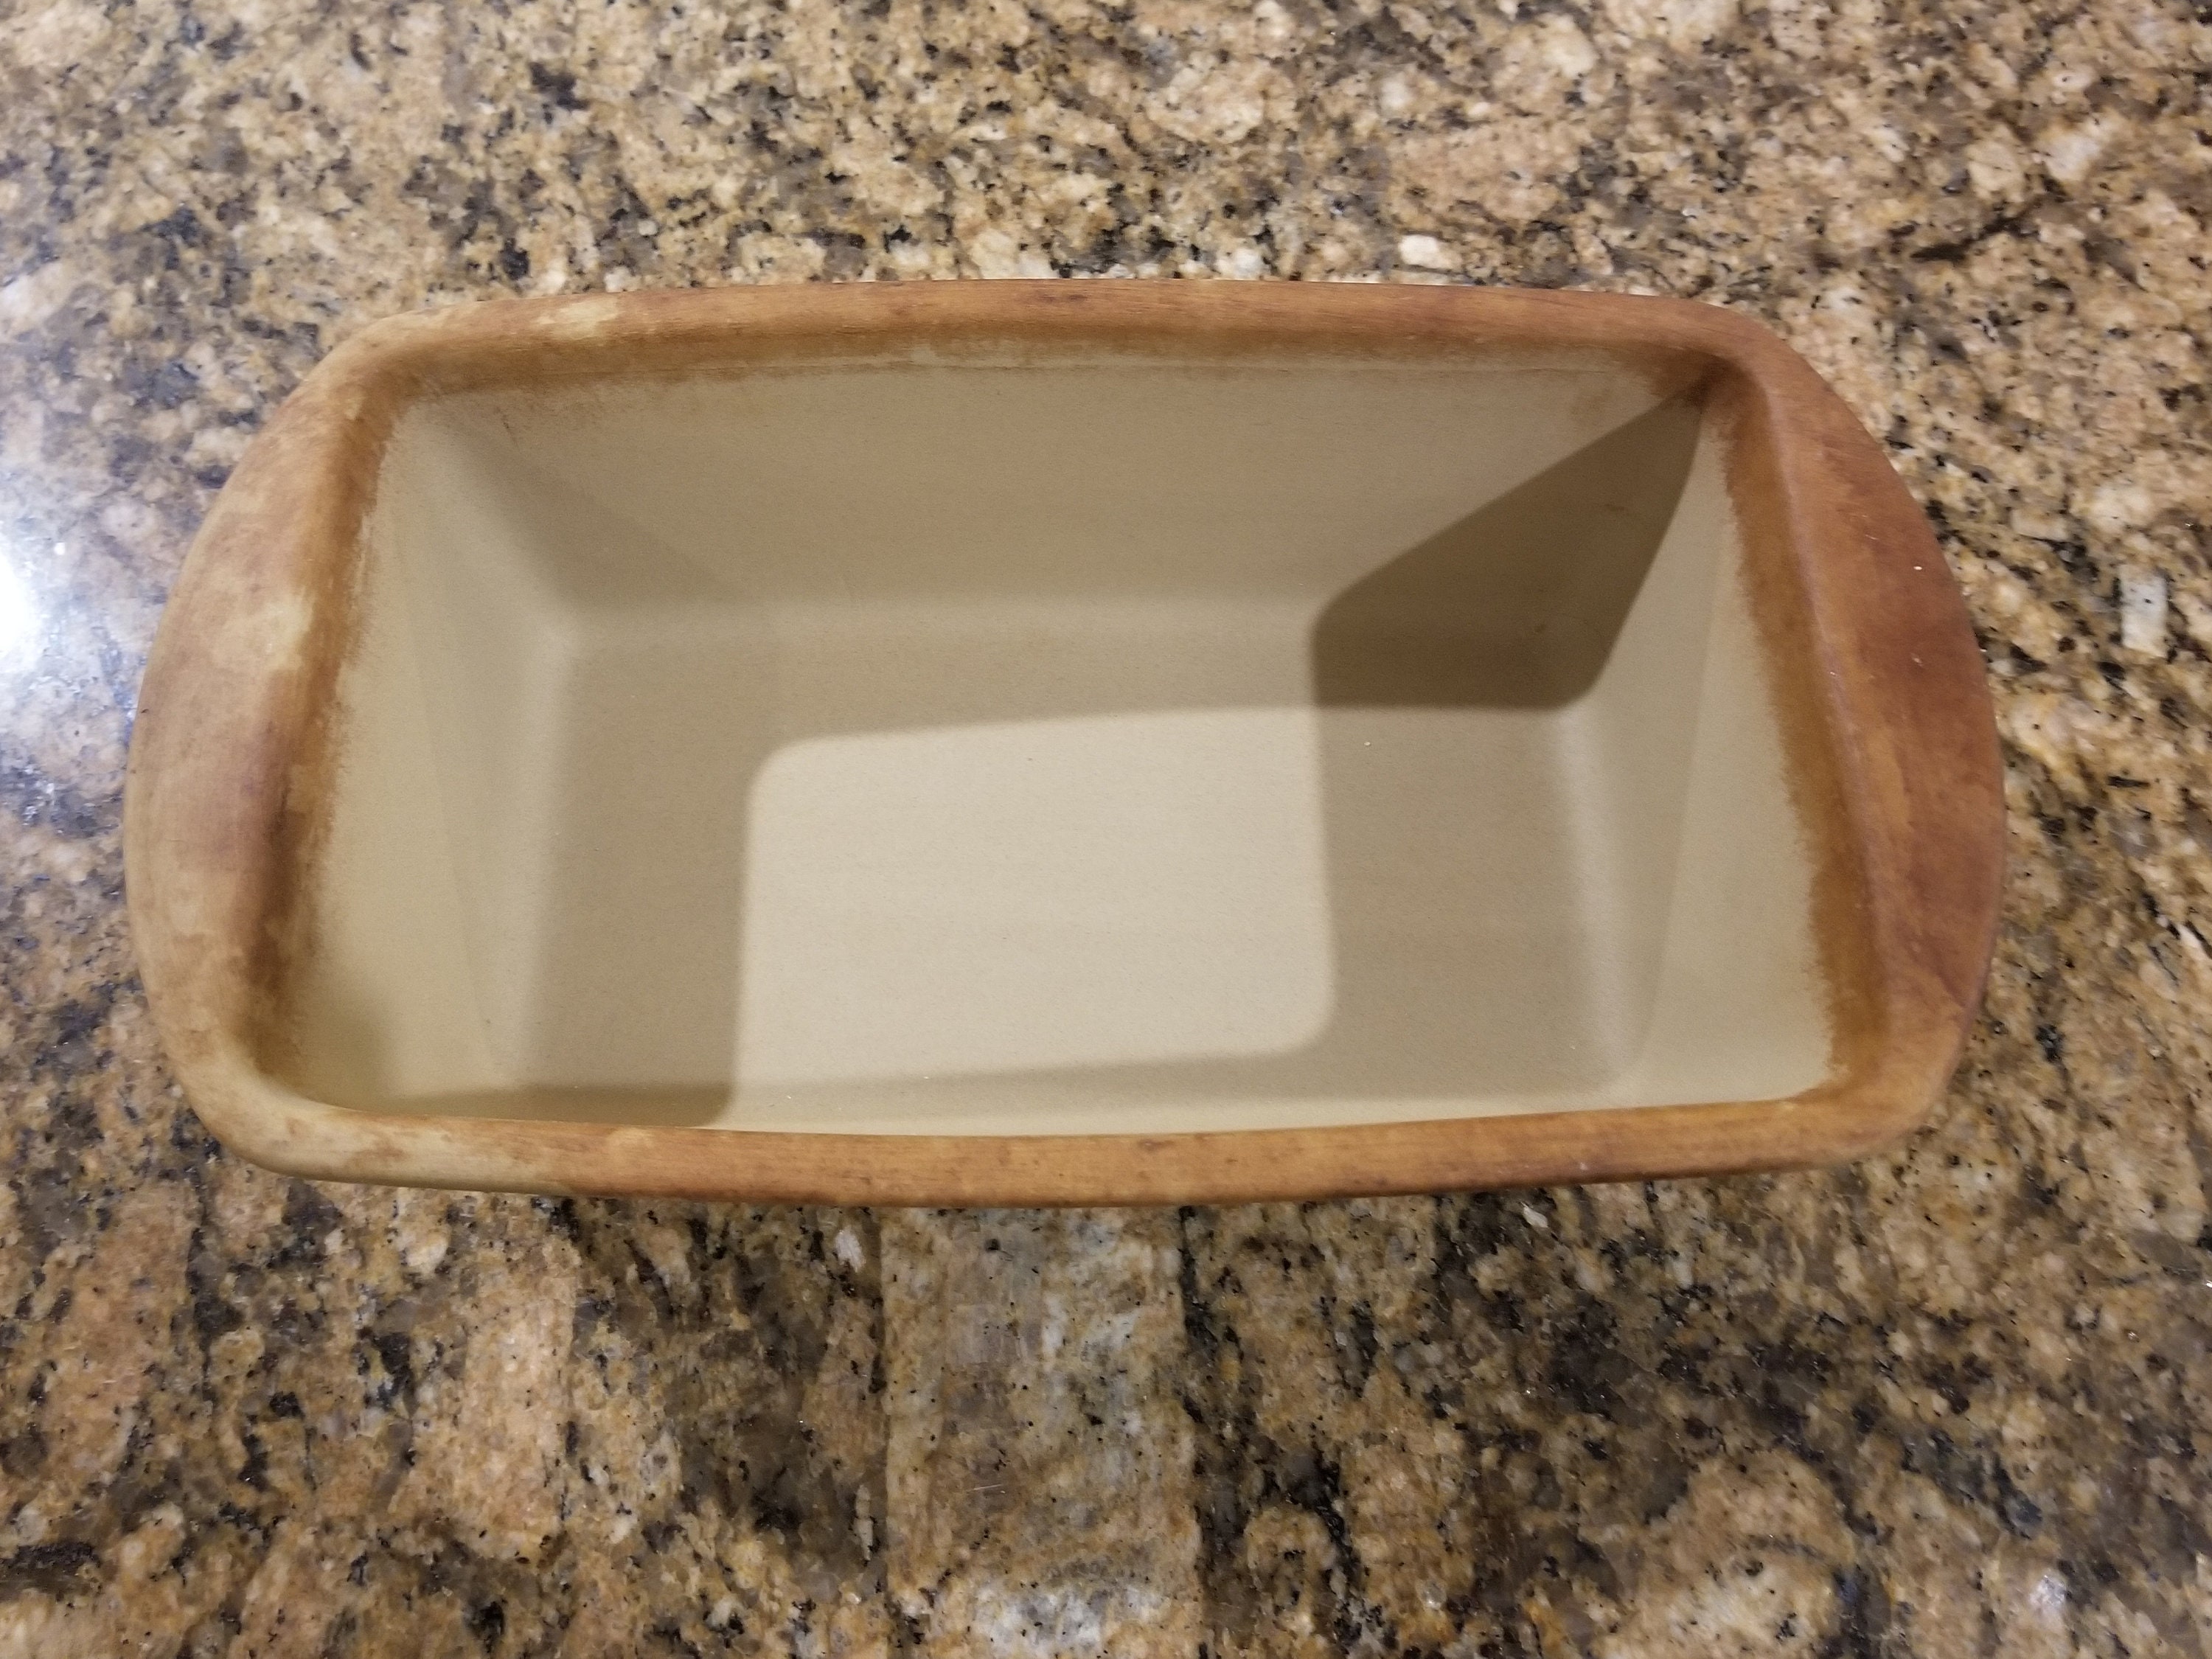 Pampered Chef Stone Loaf Pan